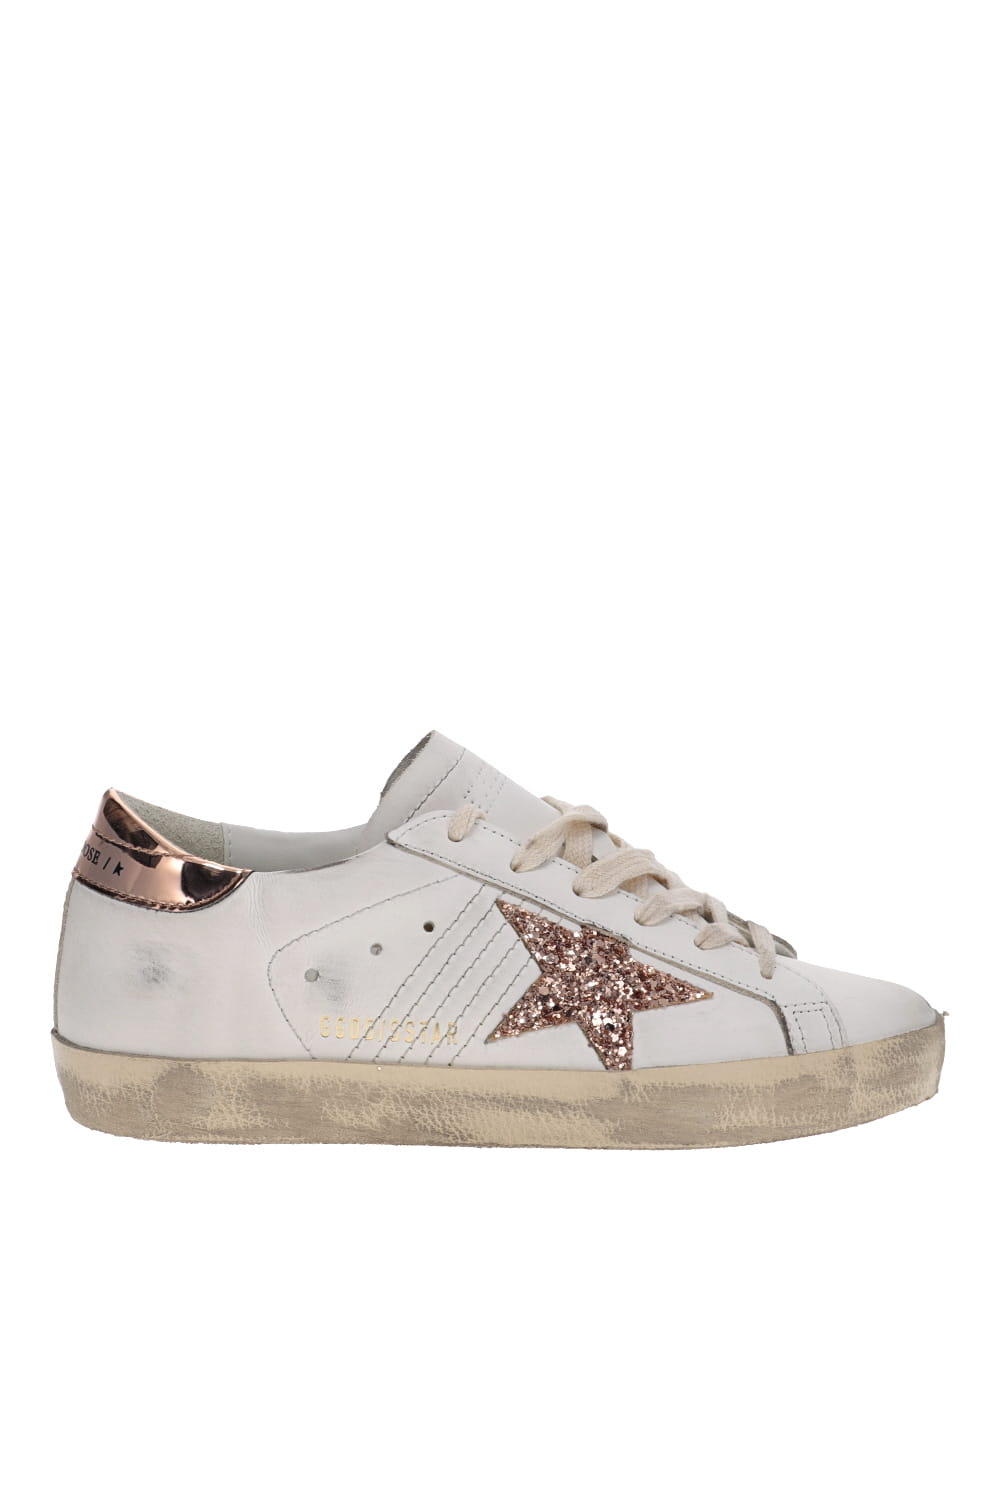 Golden Goose SUPER-STAR LEATHER UPPER WITH ORNAMENTAL STITCHING GLITTER STAR LAMINATED HEEL GWF00101.F005354.11705 WHITE/PEACH PINK/ANTIQUE ROSE